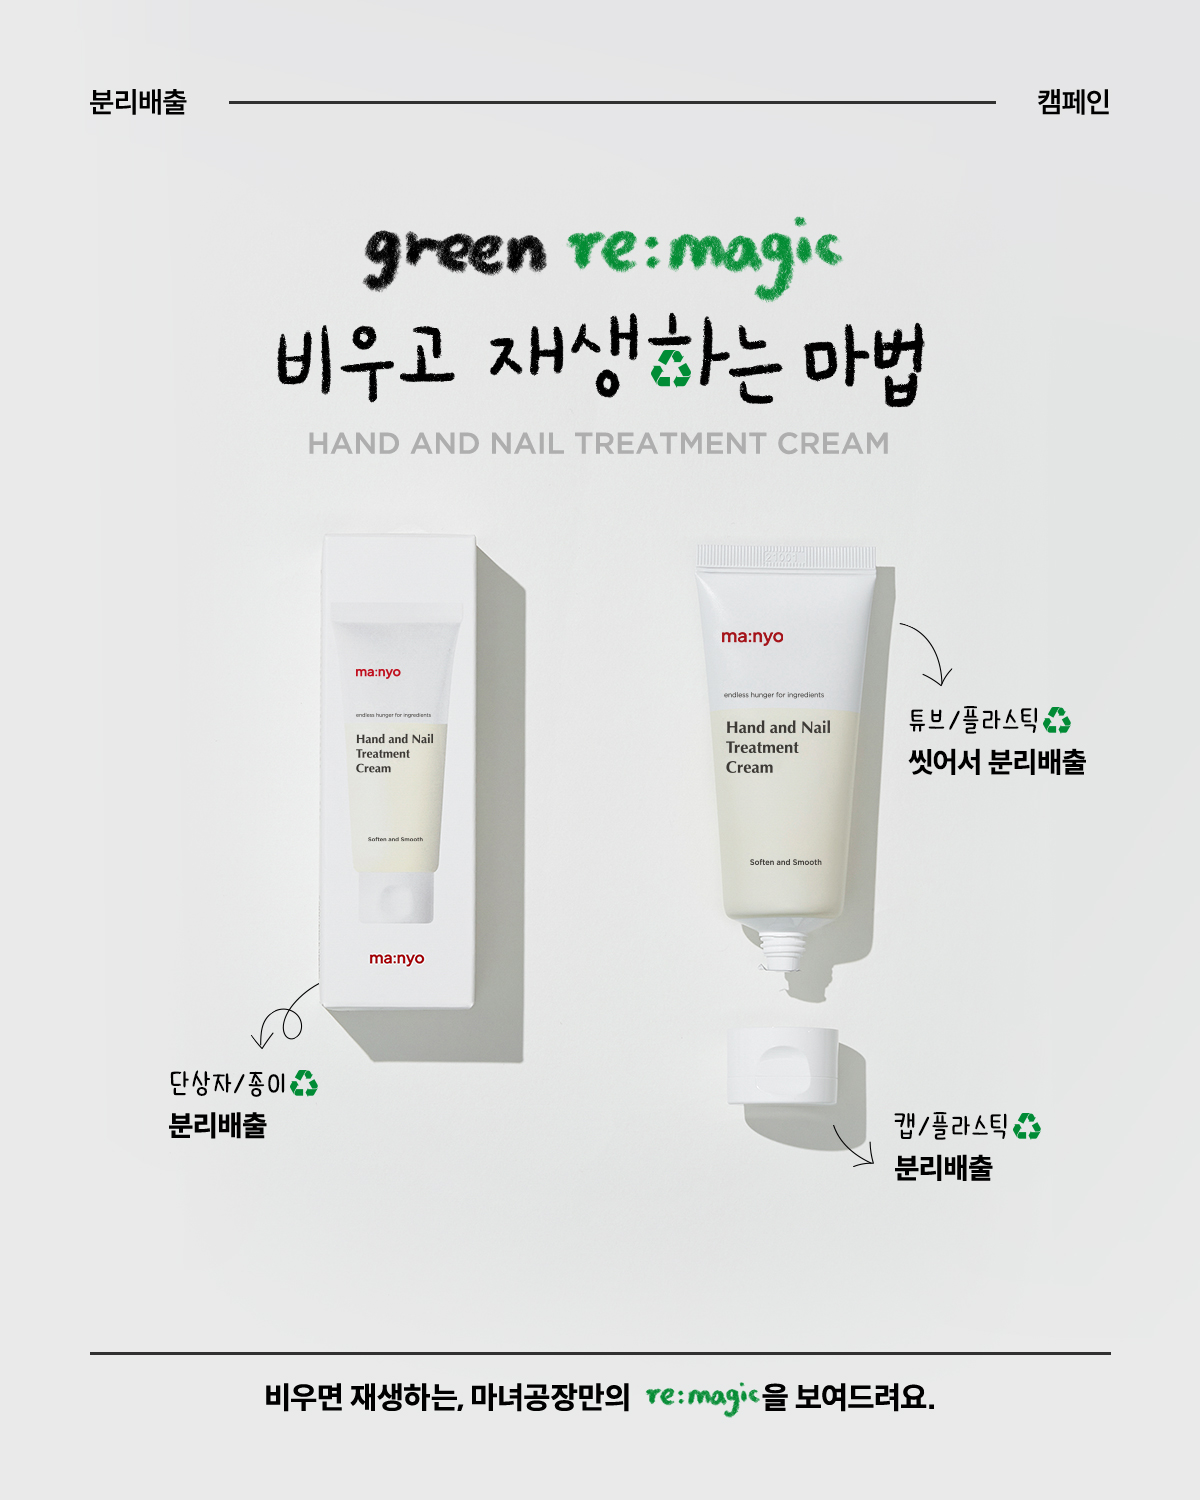 240208_hand_and_nail_treatment_cream_recycle_1200_154125.jpg